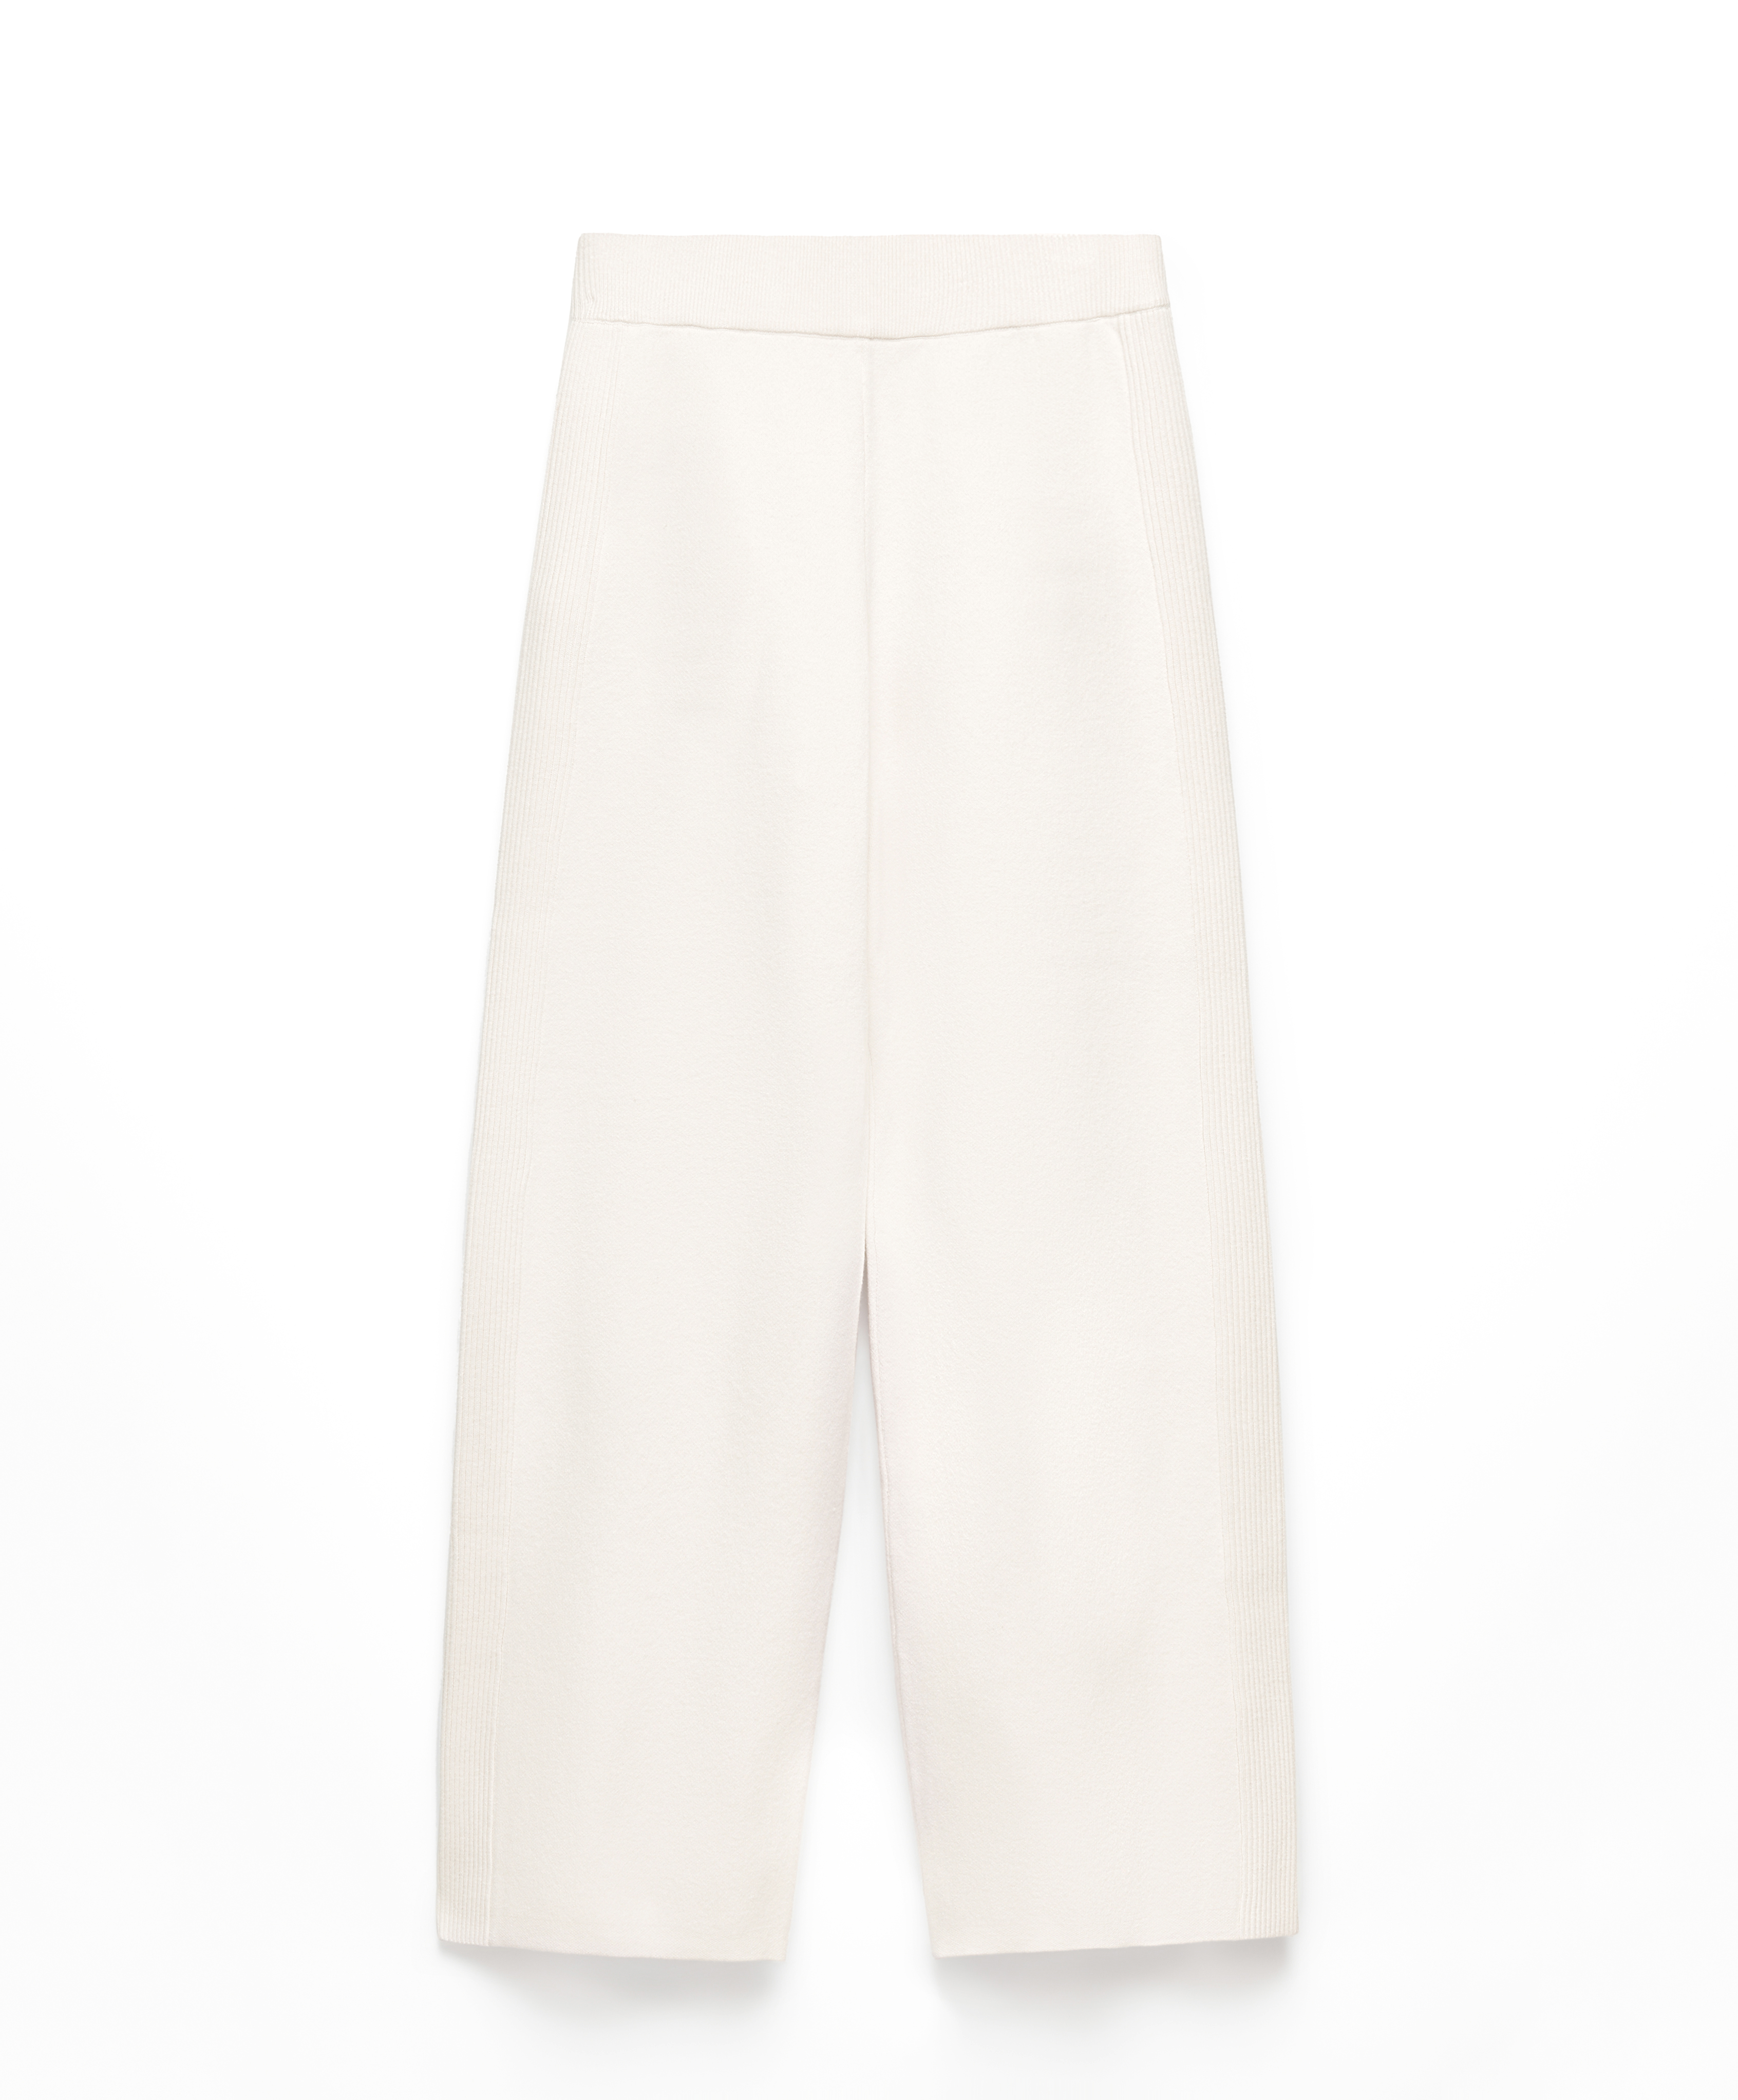 Straight-leg trousers with adjustable stretch waist. Ribbed detail at the sides.